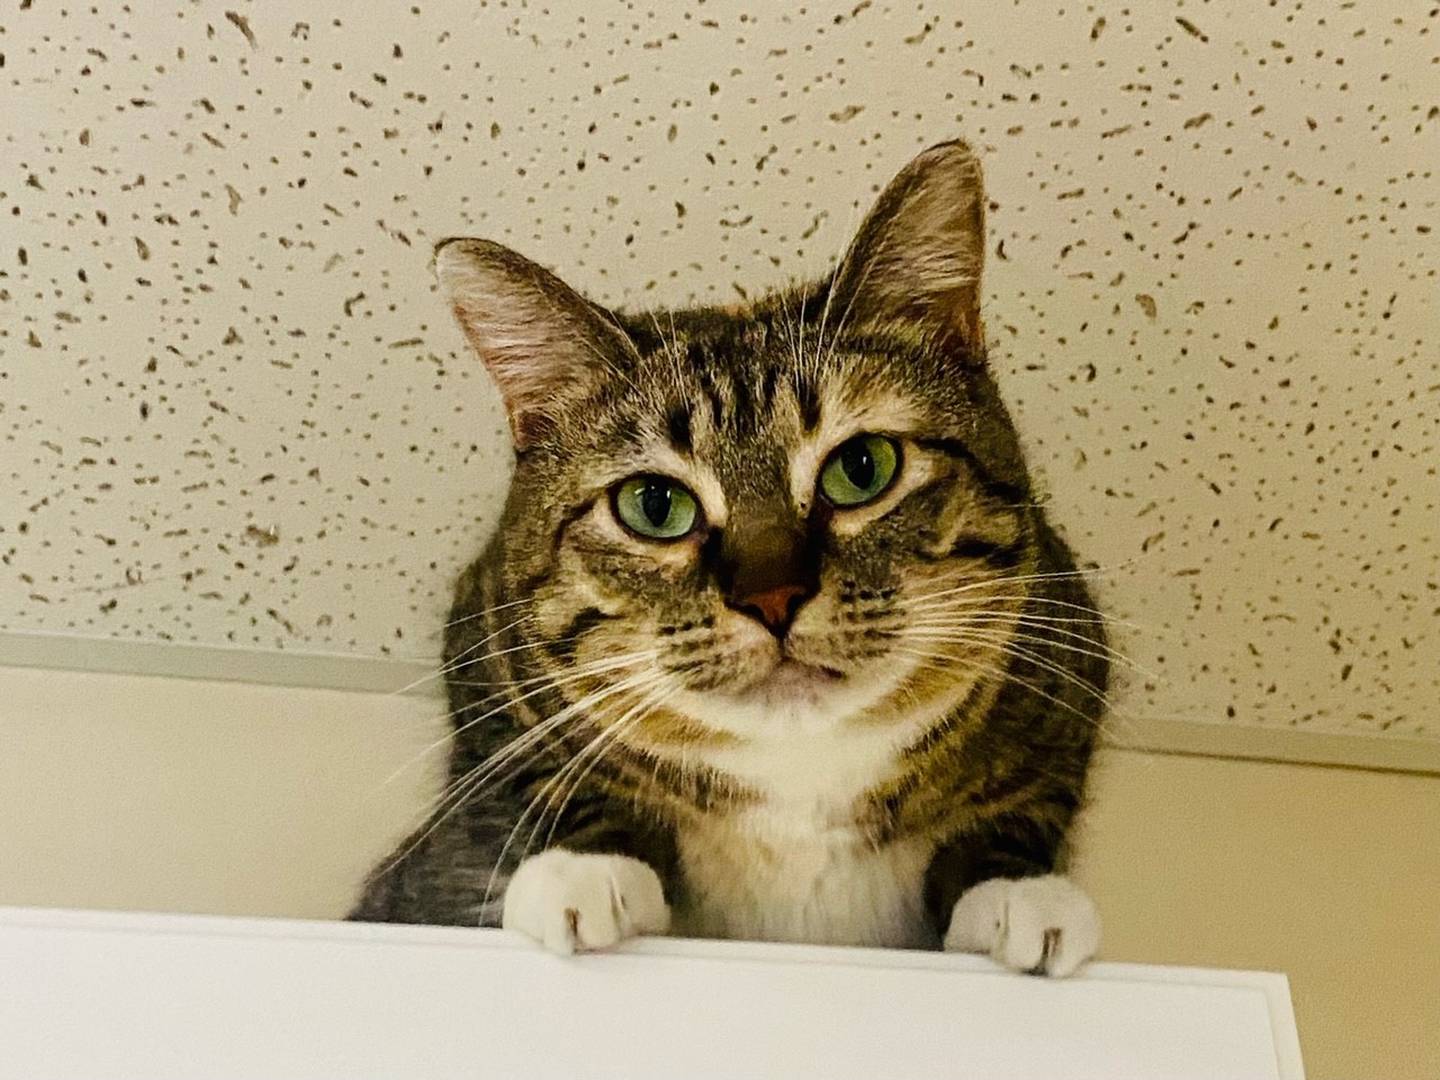 Sesame is a 1-year-old domestic shorthair. She is sweet, playful, and curious. Sesame appreciates her alone time and is fond of relaxing in her bed. For more information on Sesame, including adoption fees please visit justanimals.org or call 815-448-2510.